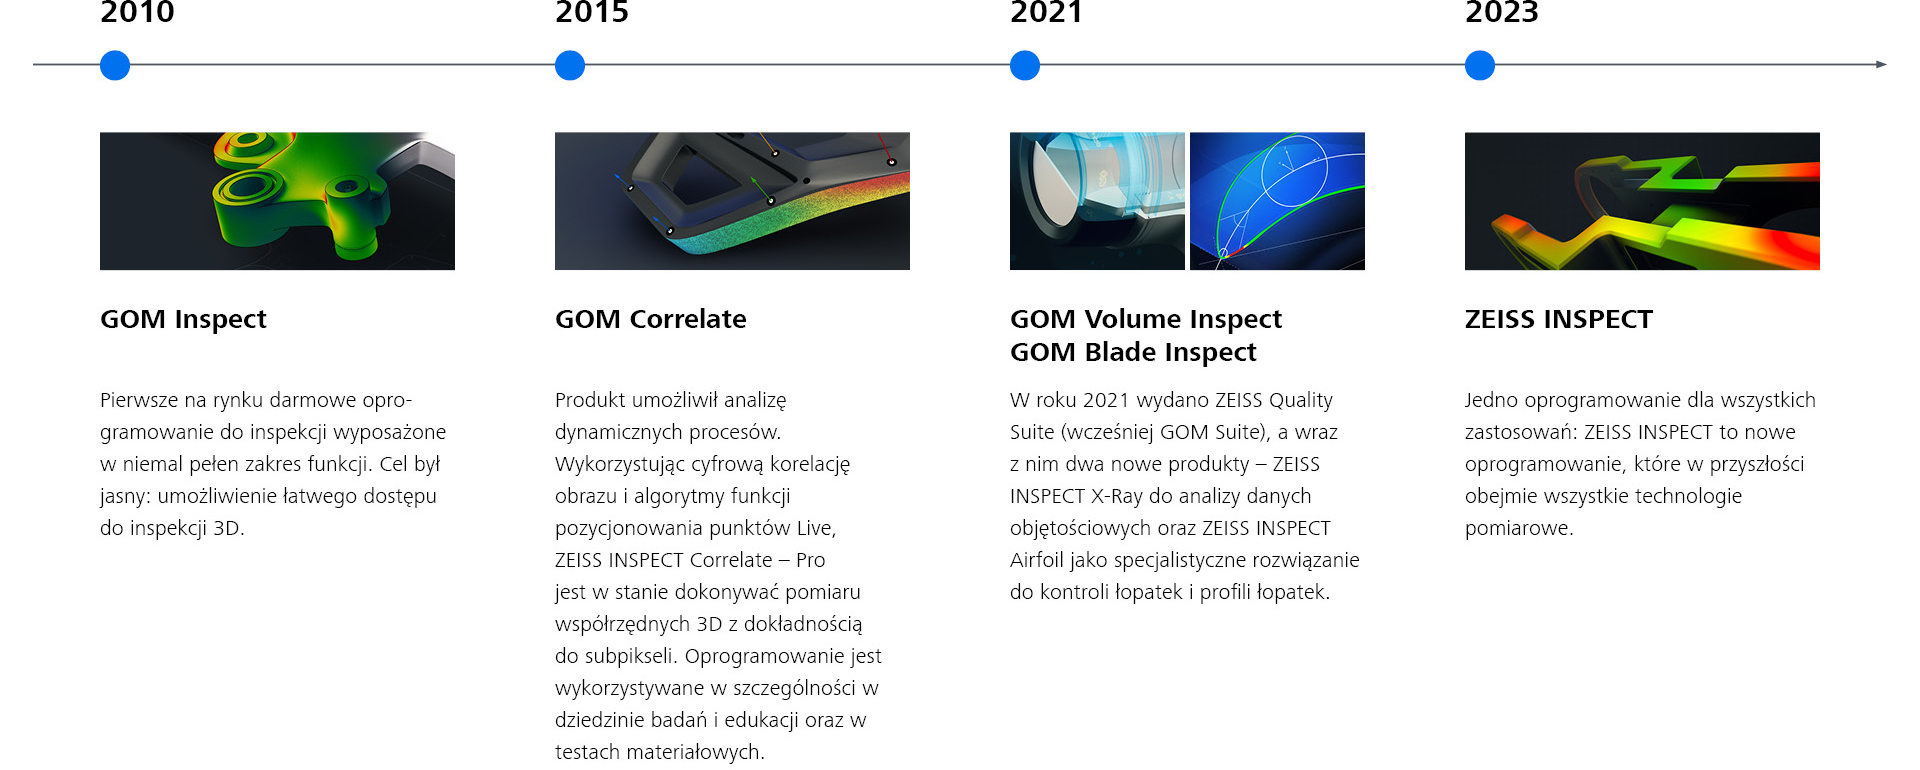 Timeline showing the history from GOM software to ZEISS INSPECT